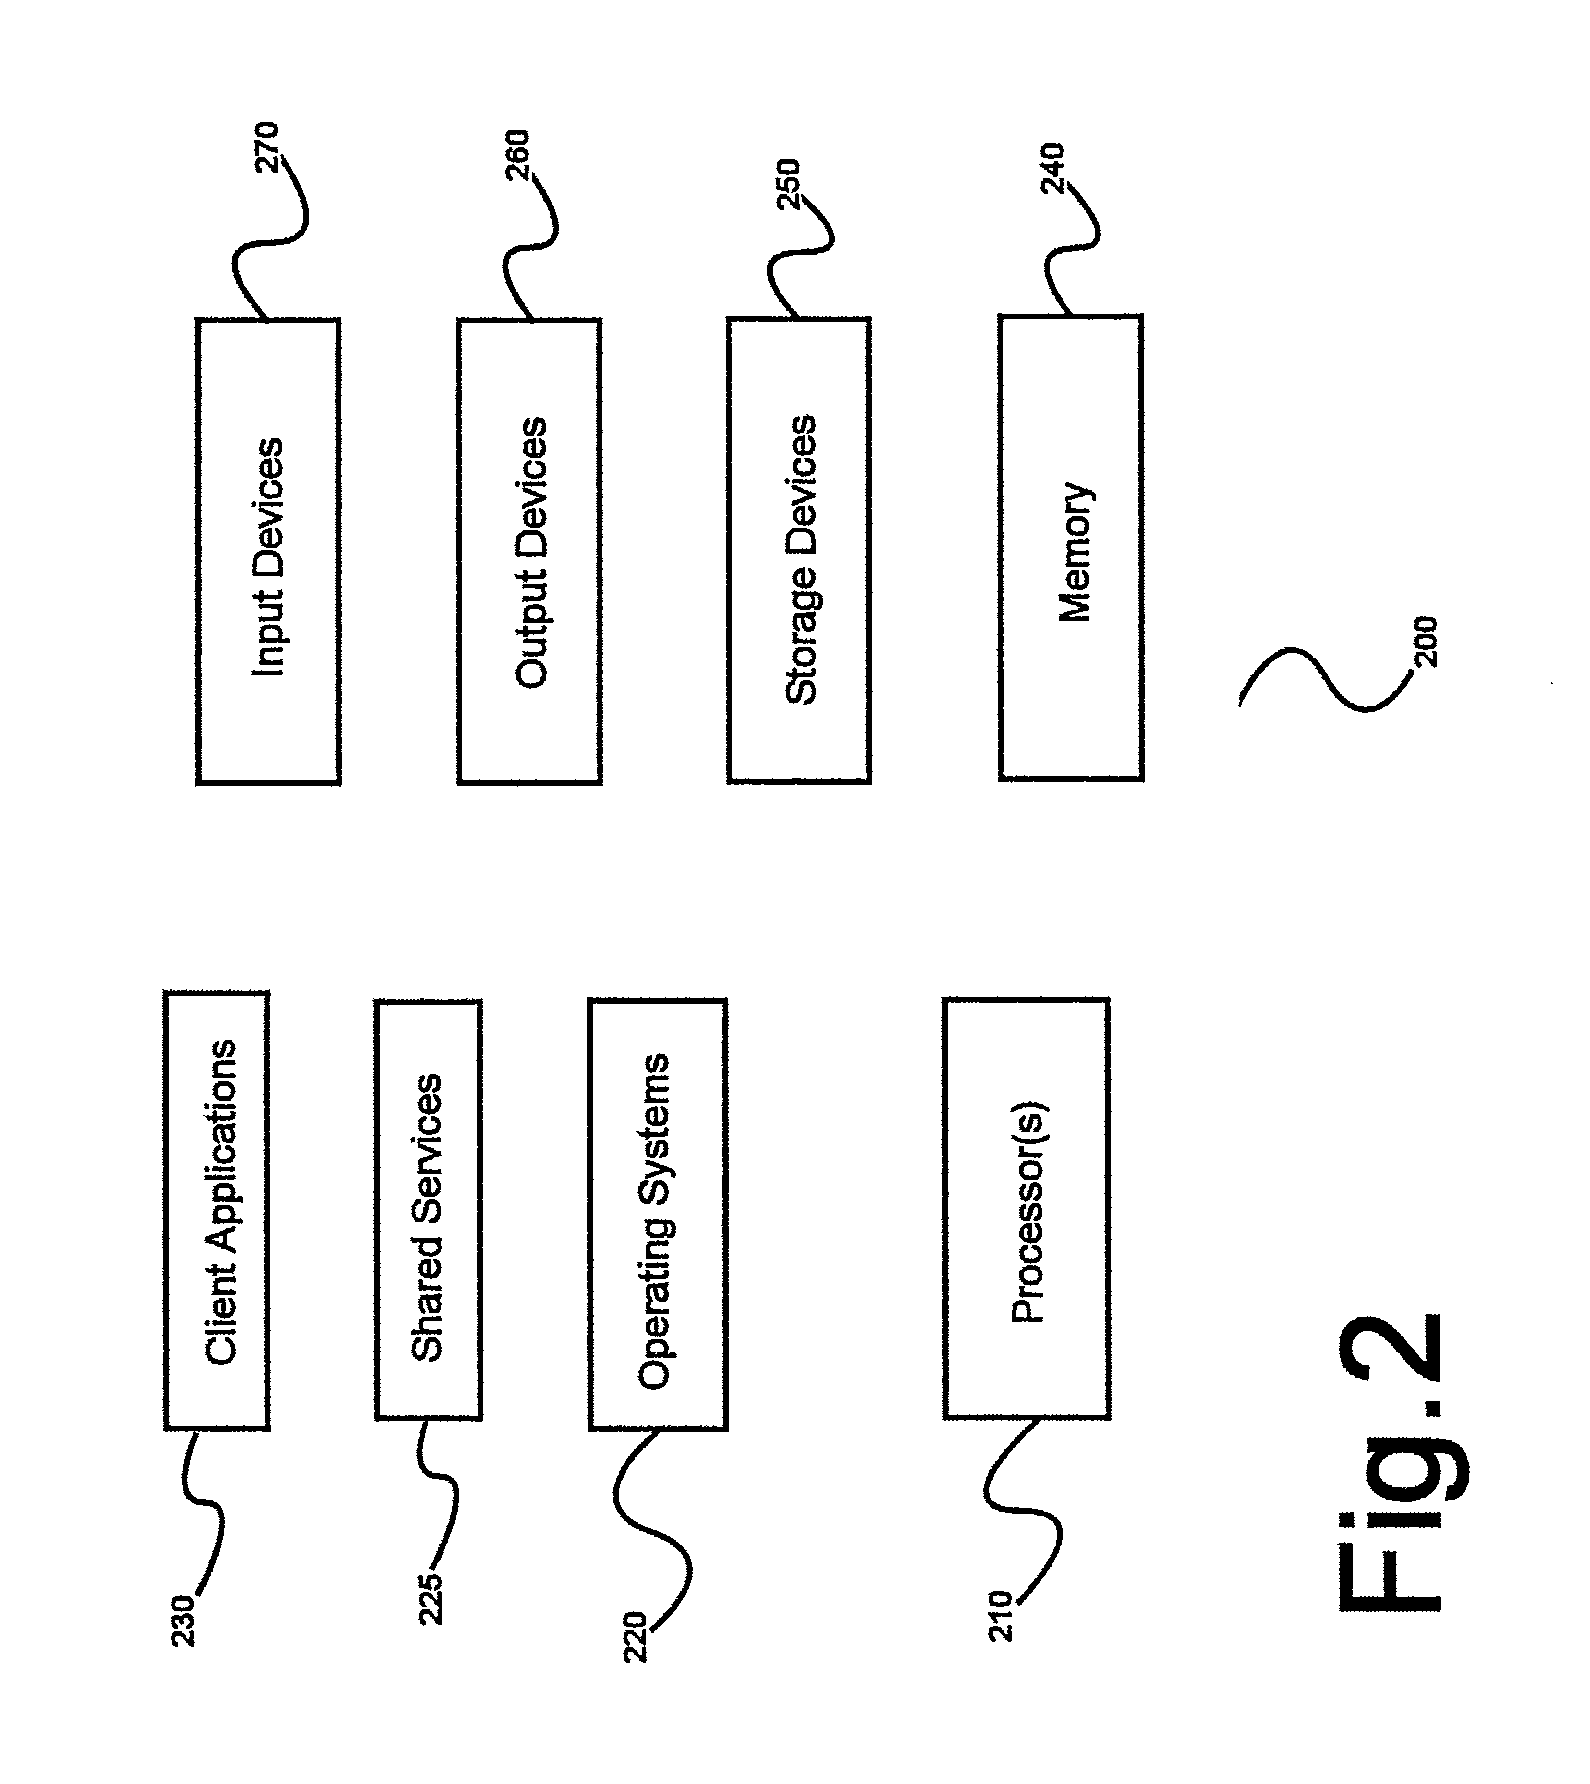 System and method for optimized and distributed routing of interactions